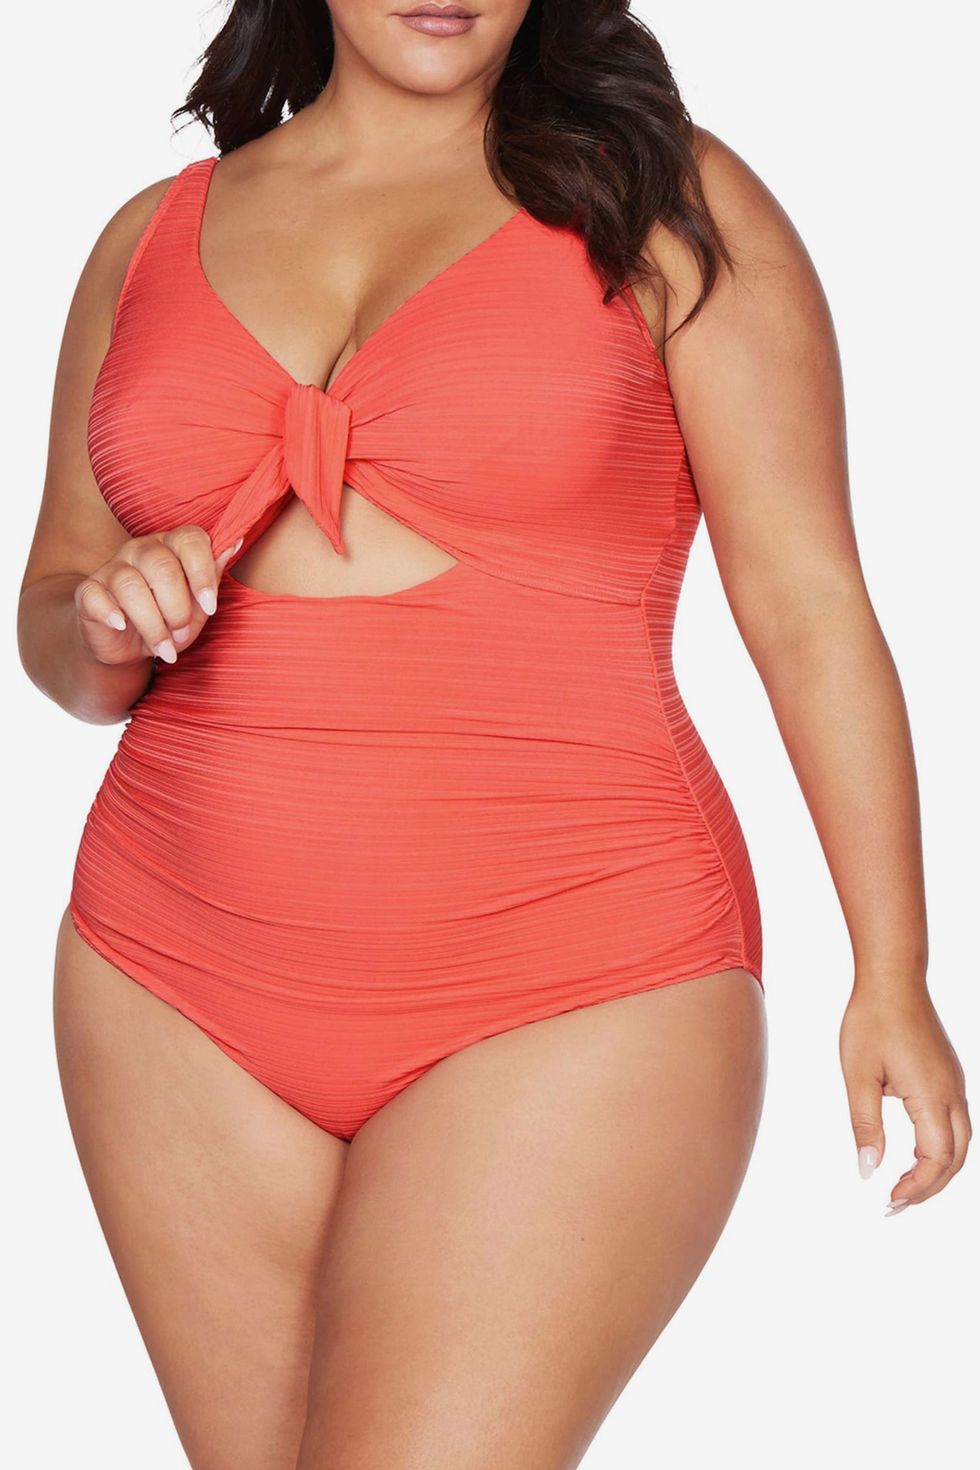 Shoppers Found the “Most Flattering” Swimsuit for Up to 64% Off